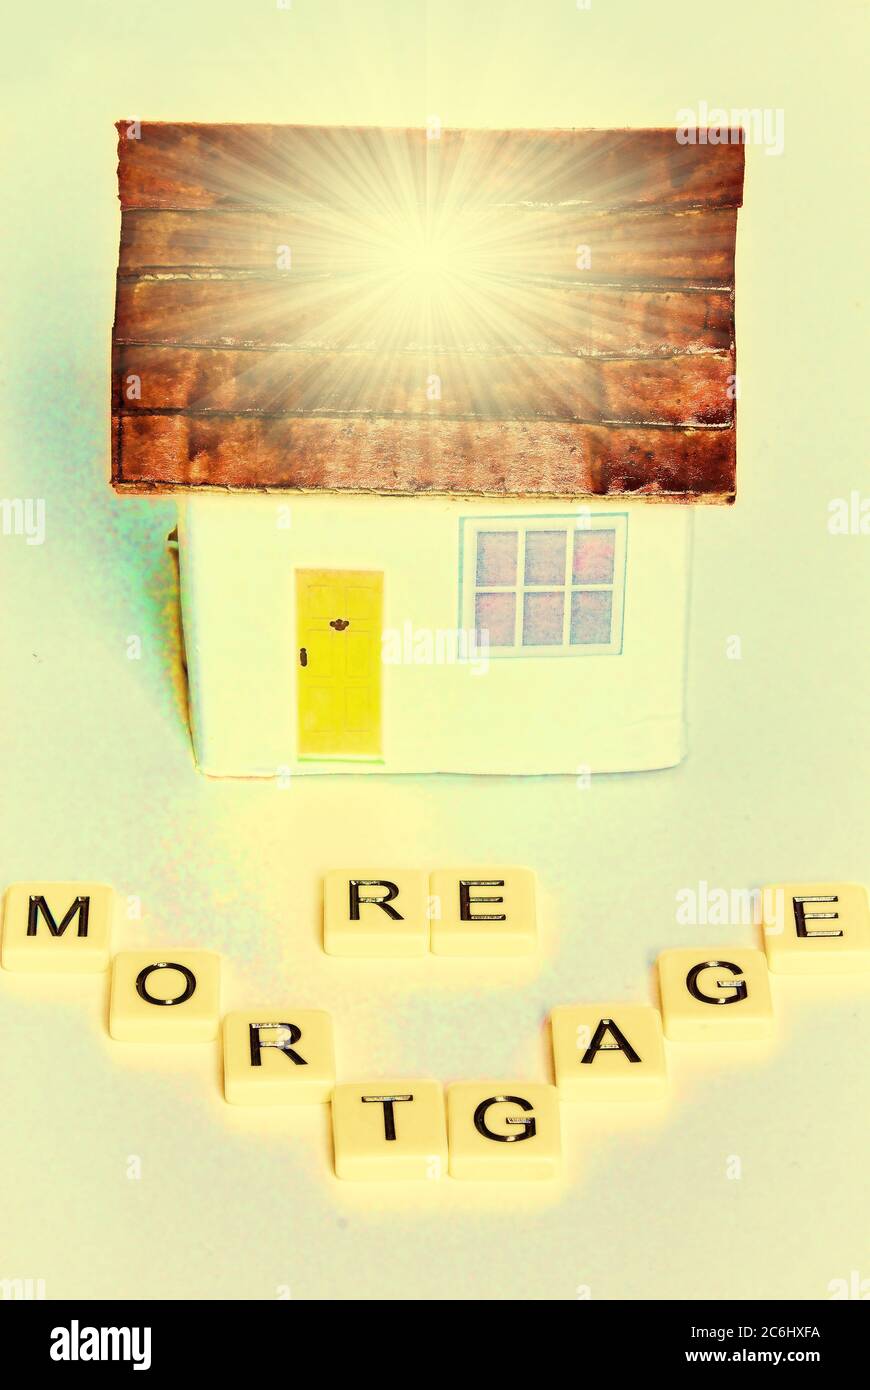 Financial concept image. Cost of  Covid 19 to economy and savings. need to re-mortgage, take money out of property to survive.  Words, 'Re, Mortgage', Stock Photo